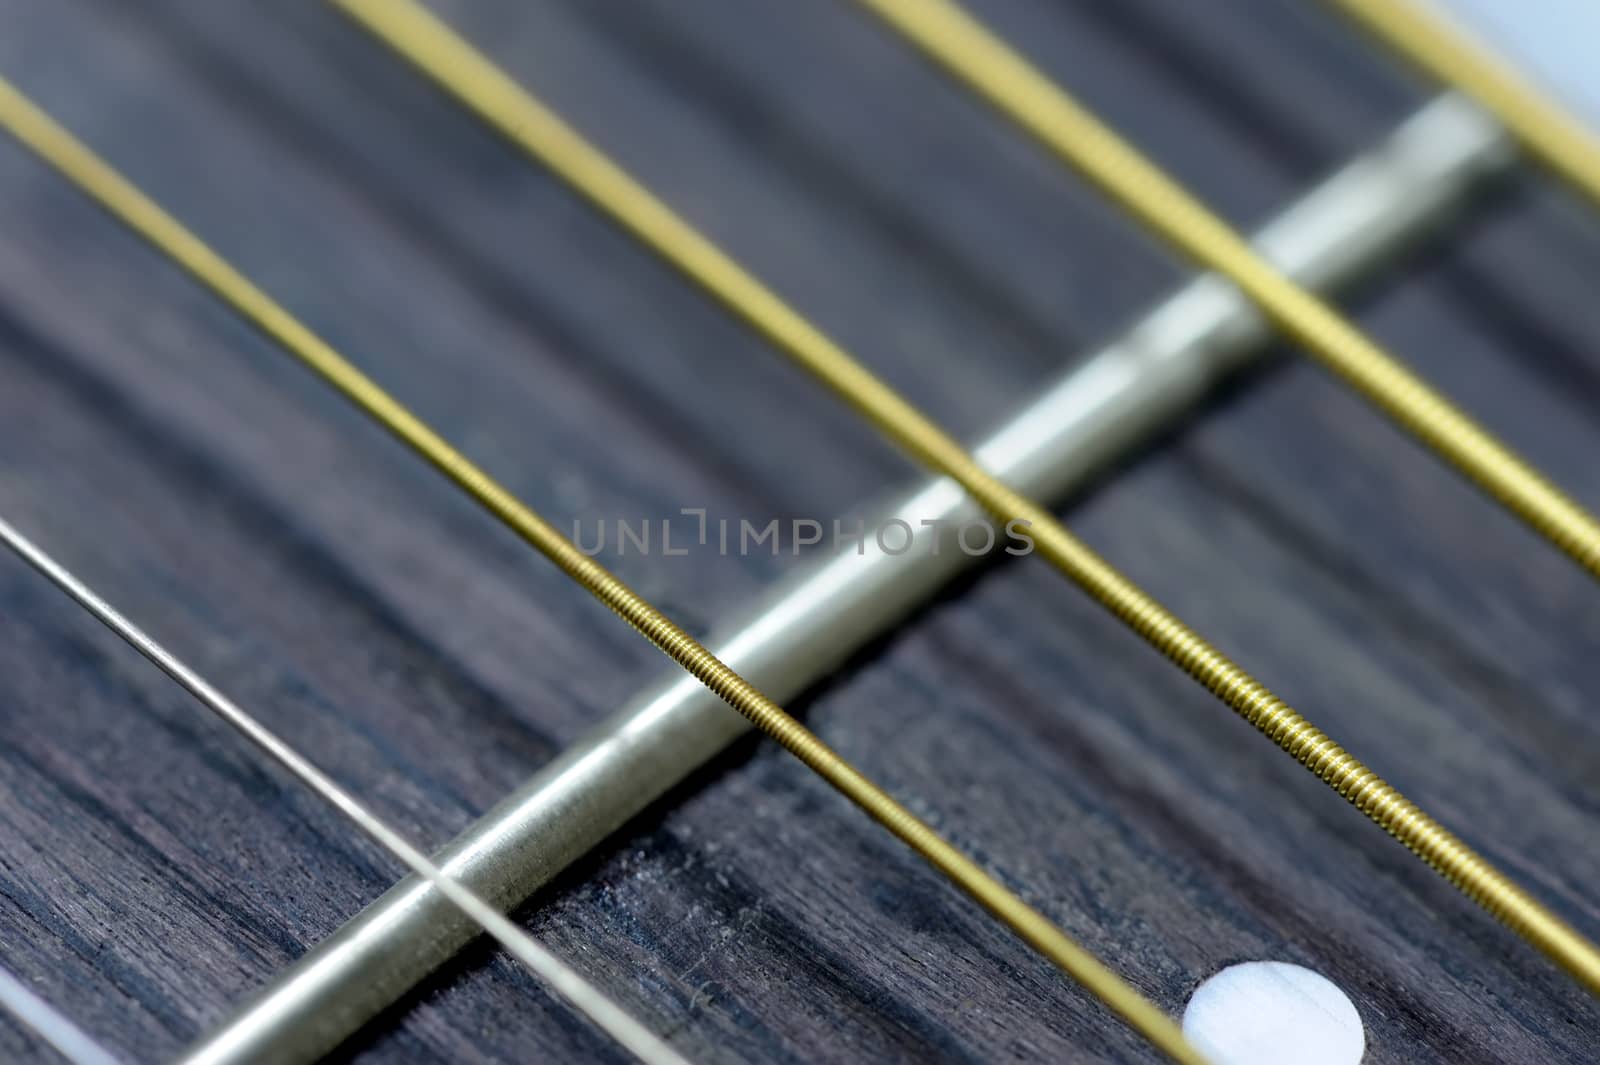 Close acoustic guitar strings and frets